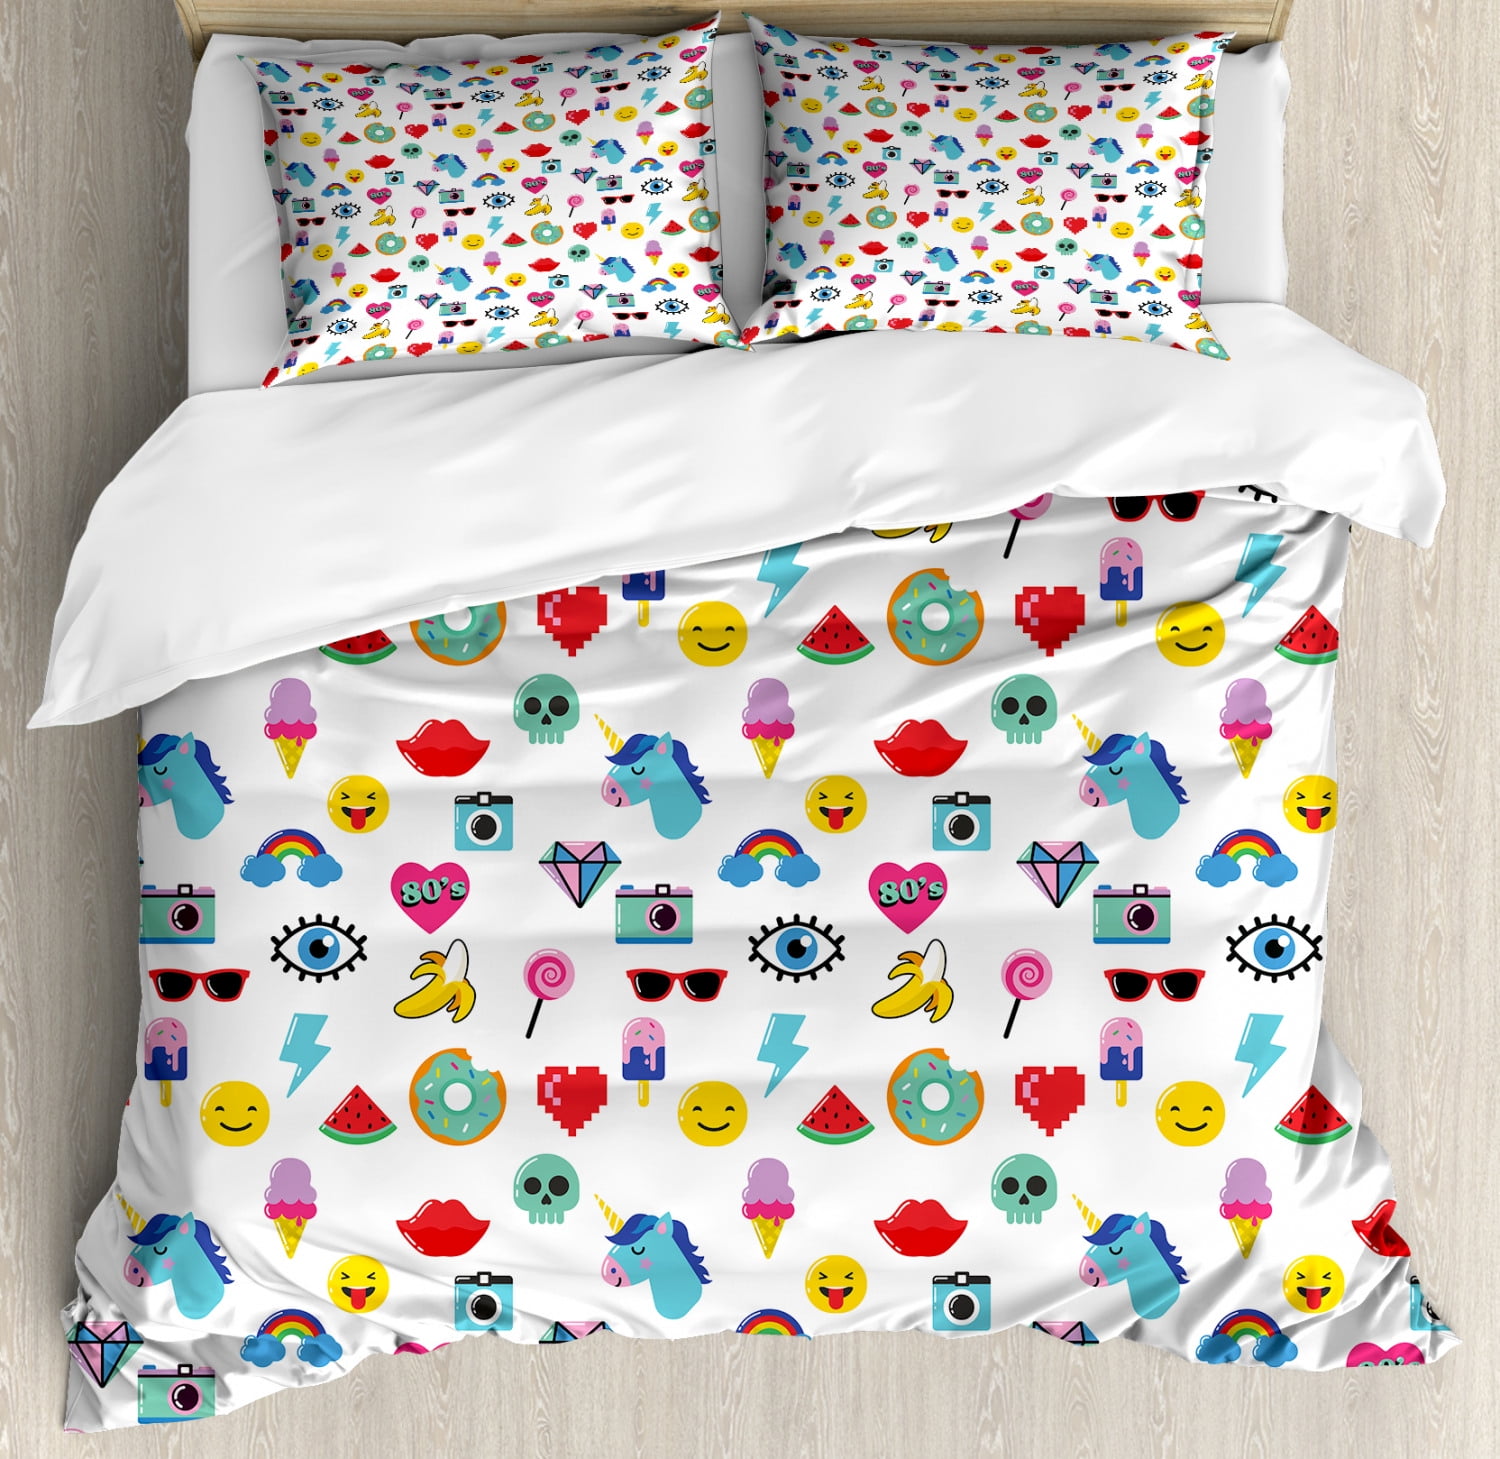 5 Piece Bed In A Bag Sheets & Sham Girls Emoji Black Icons Twin Comforter 